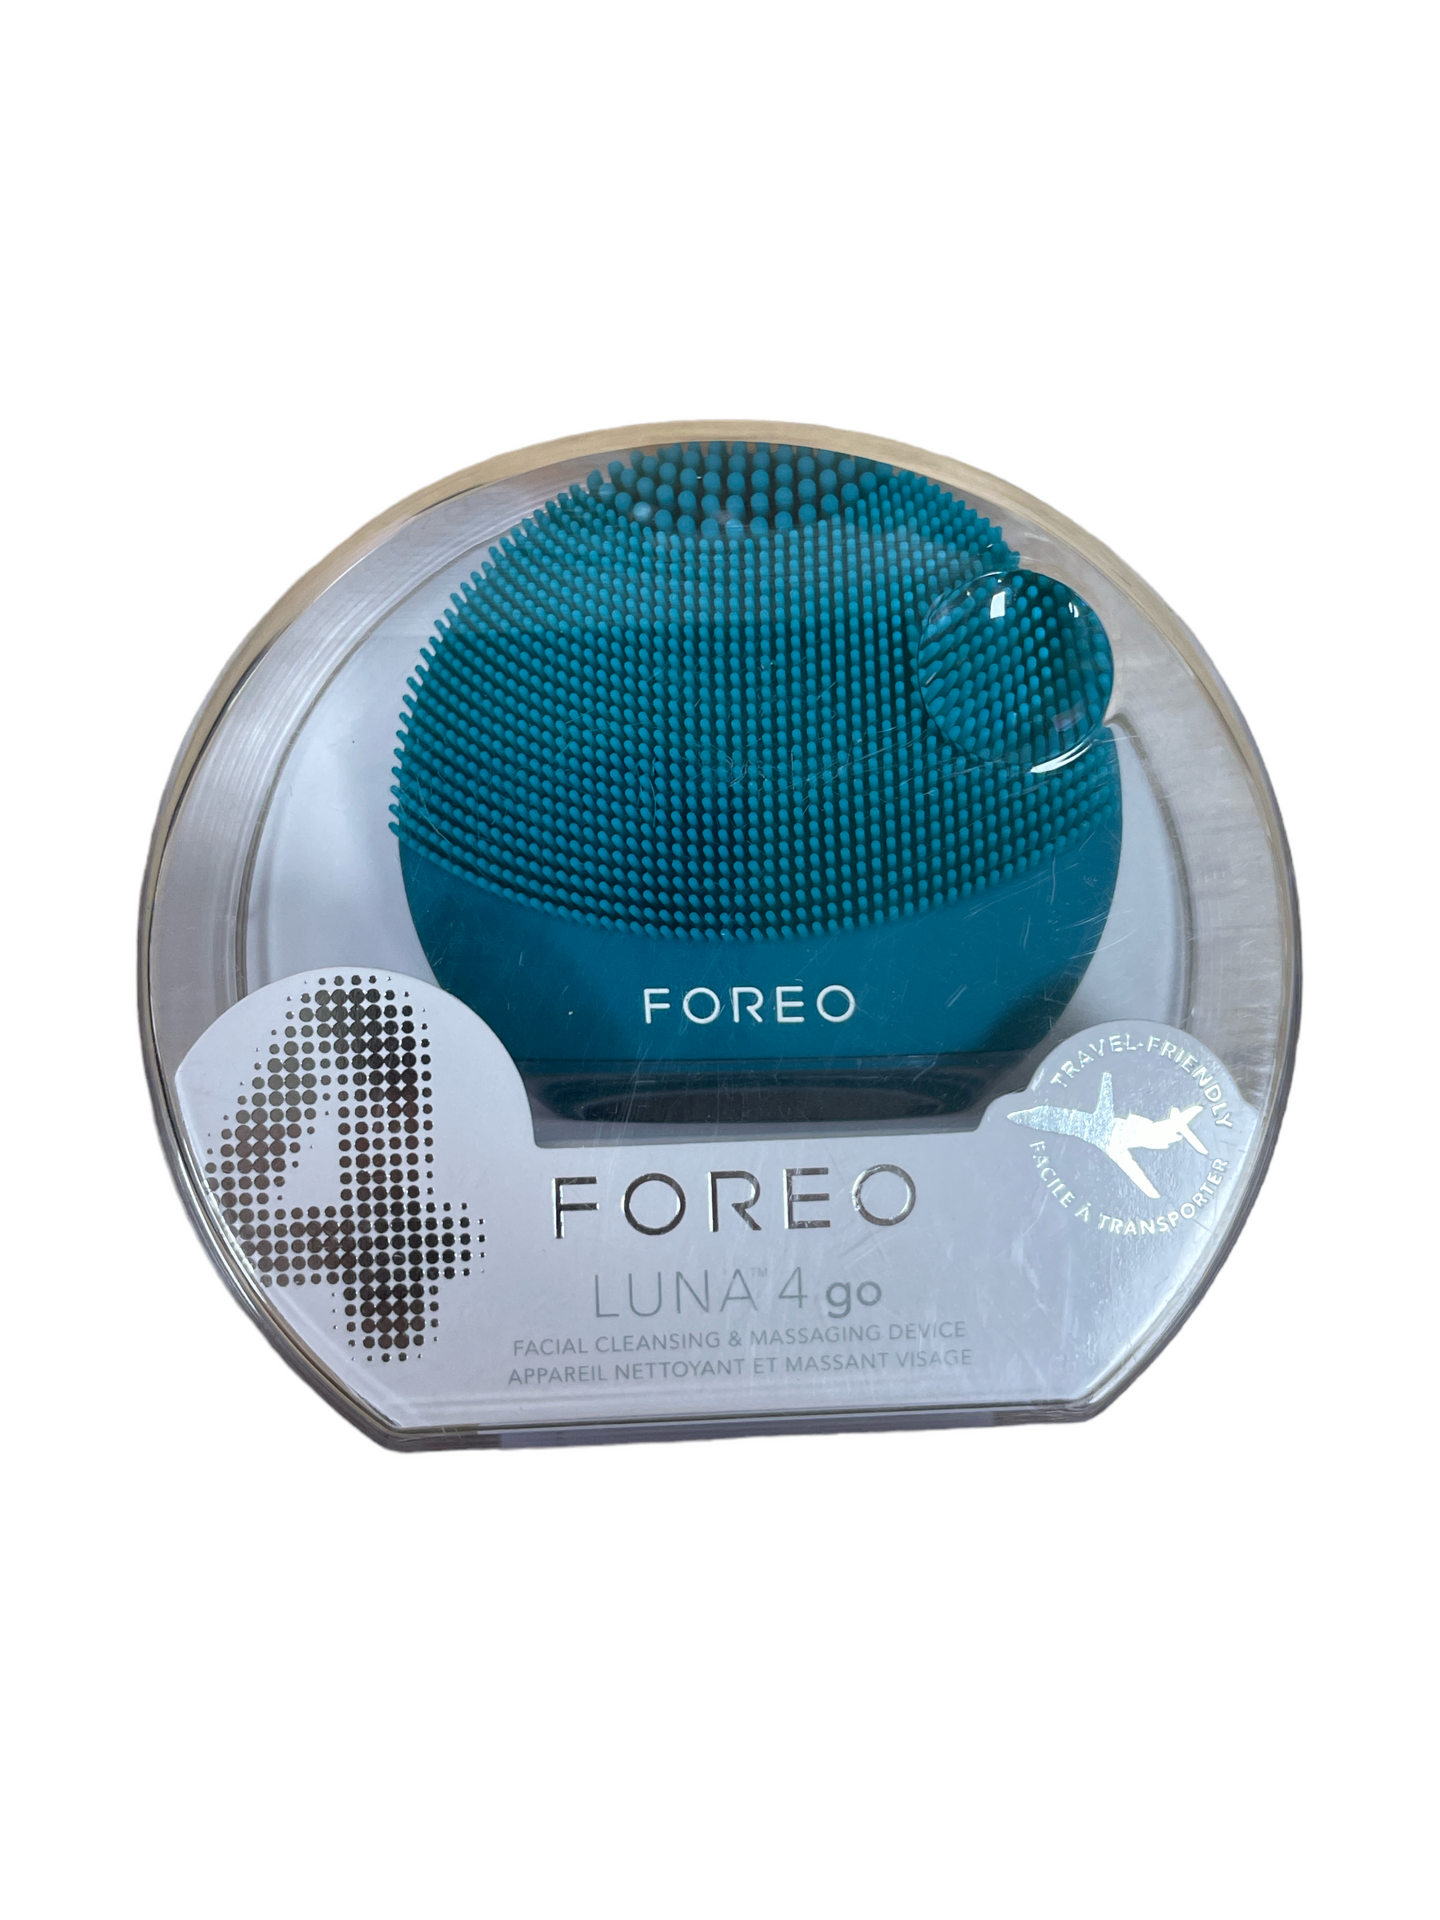 Foreo Luna 4 Go Facial Cleansing & Massaging Device